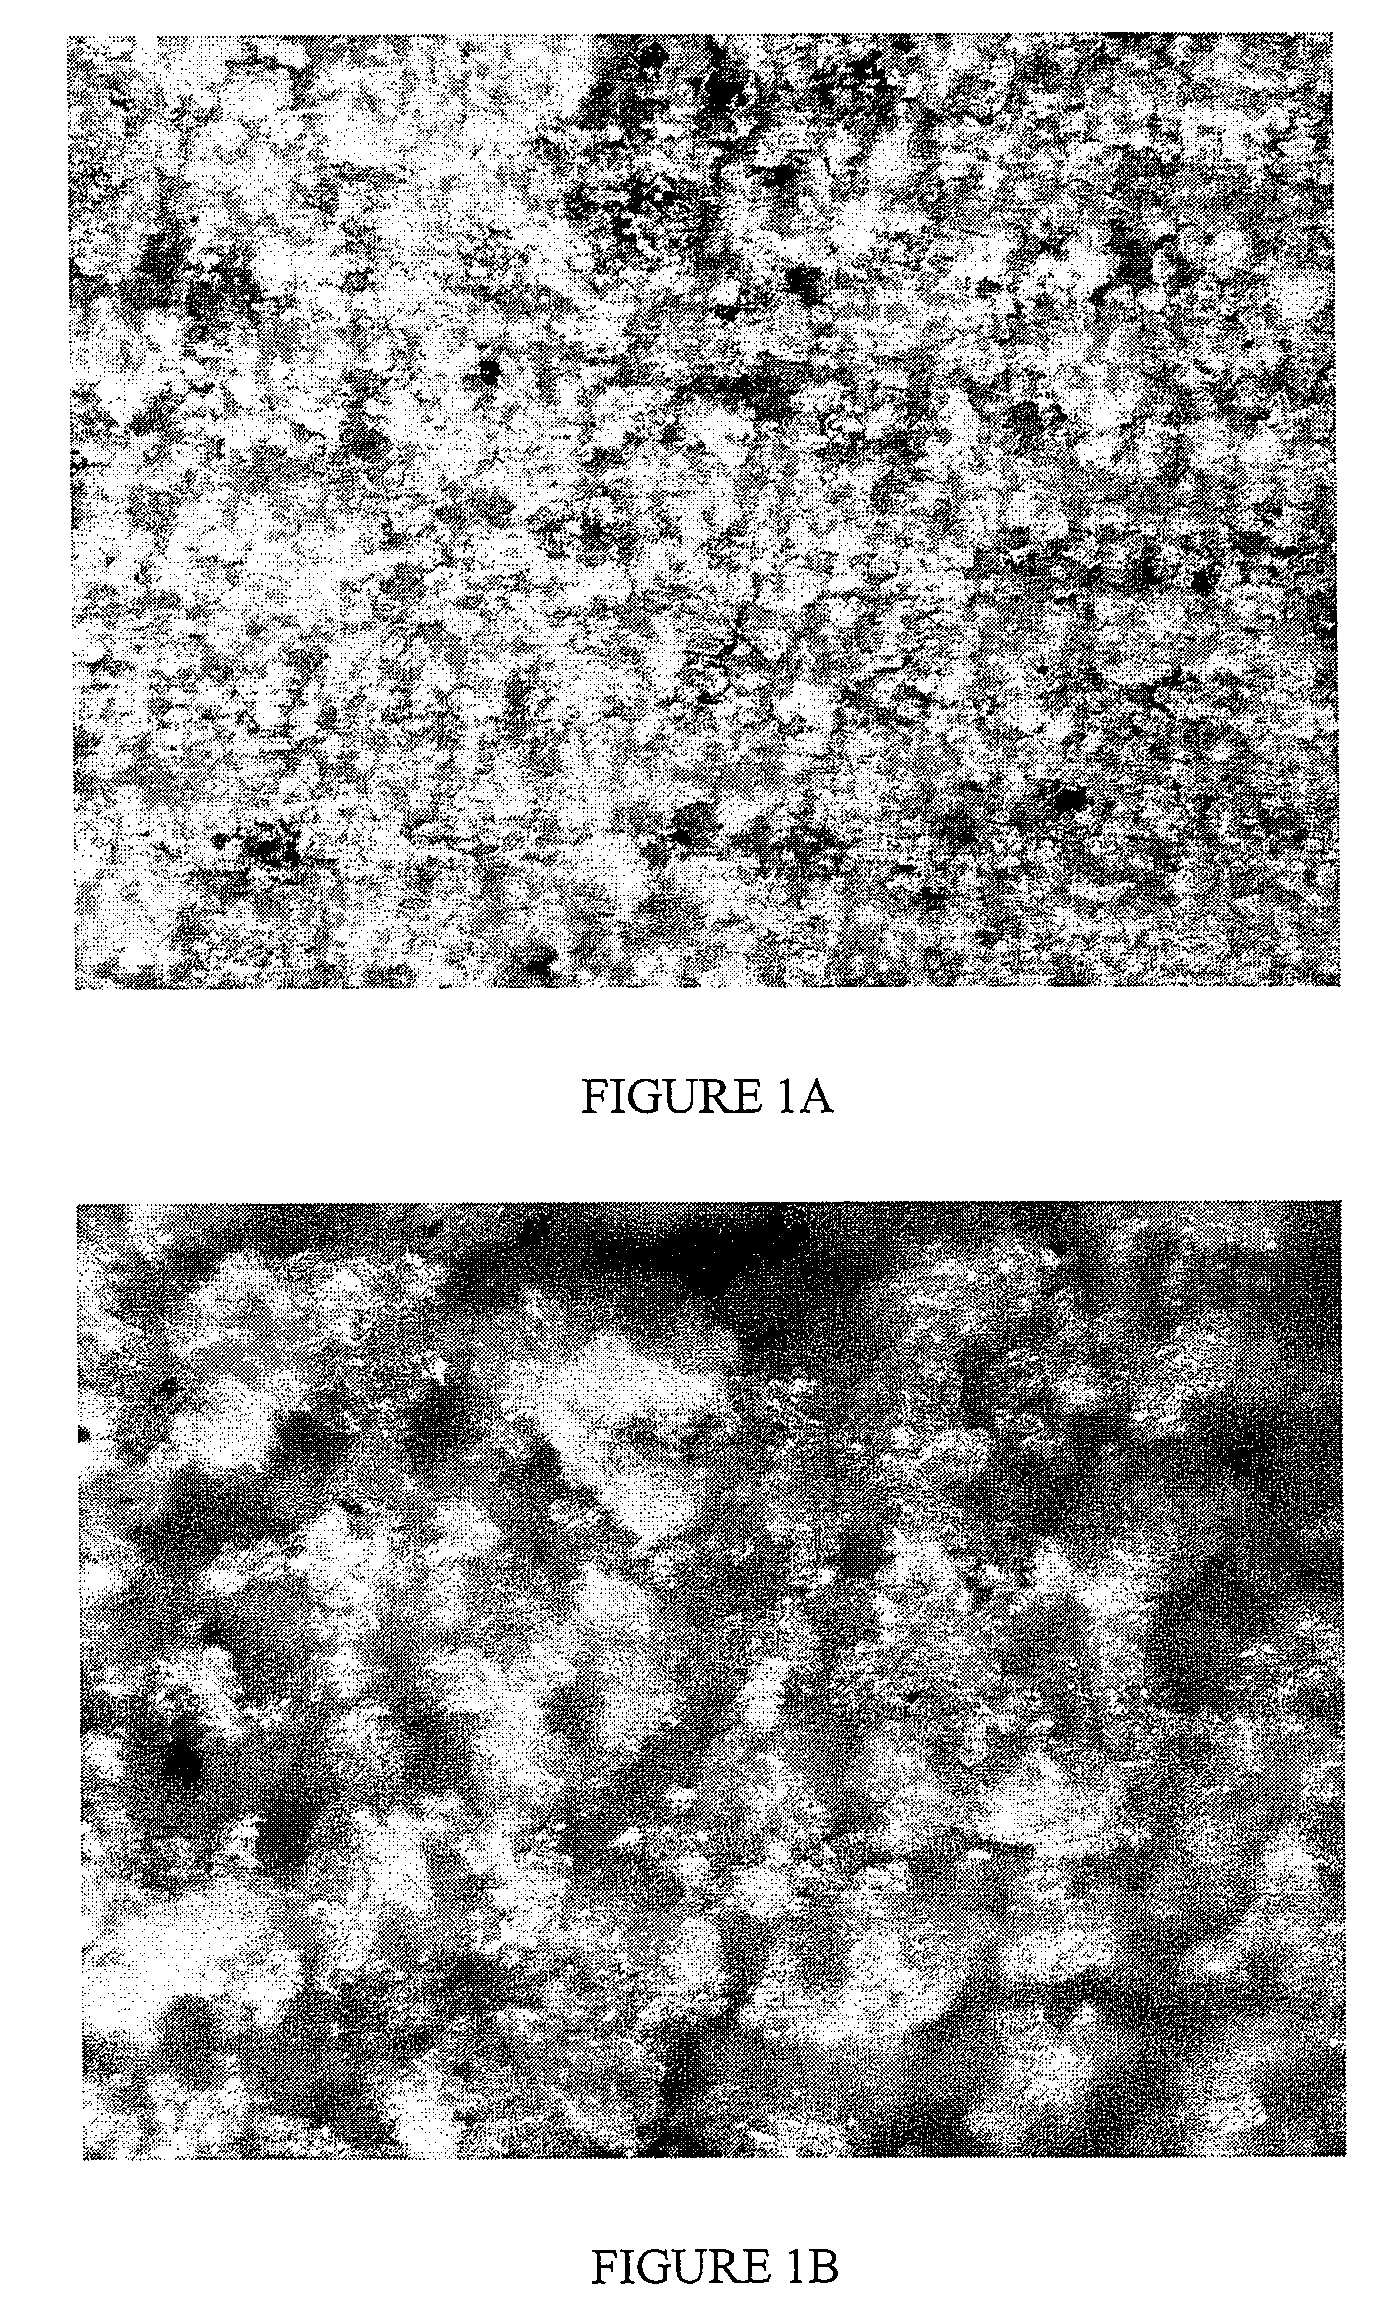 Pumice containing compositions for cementing a well